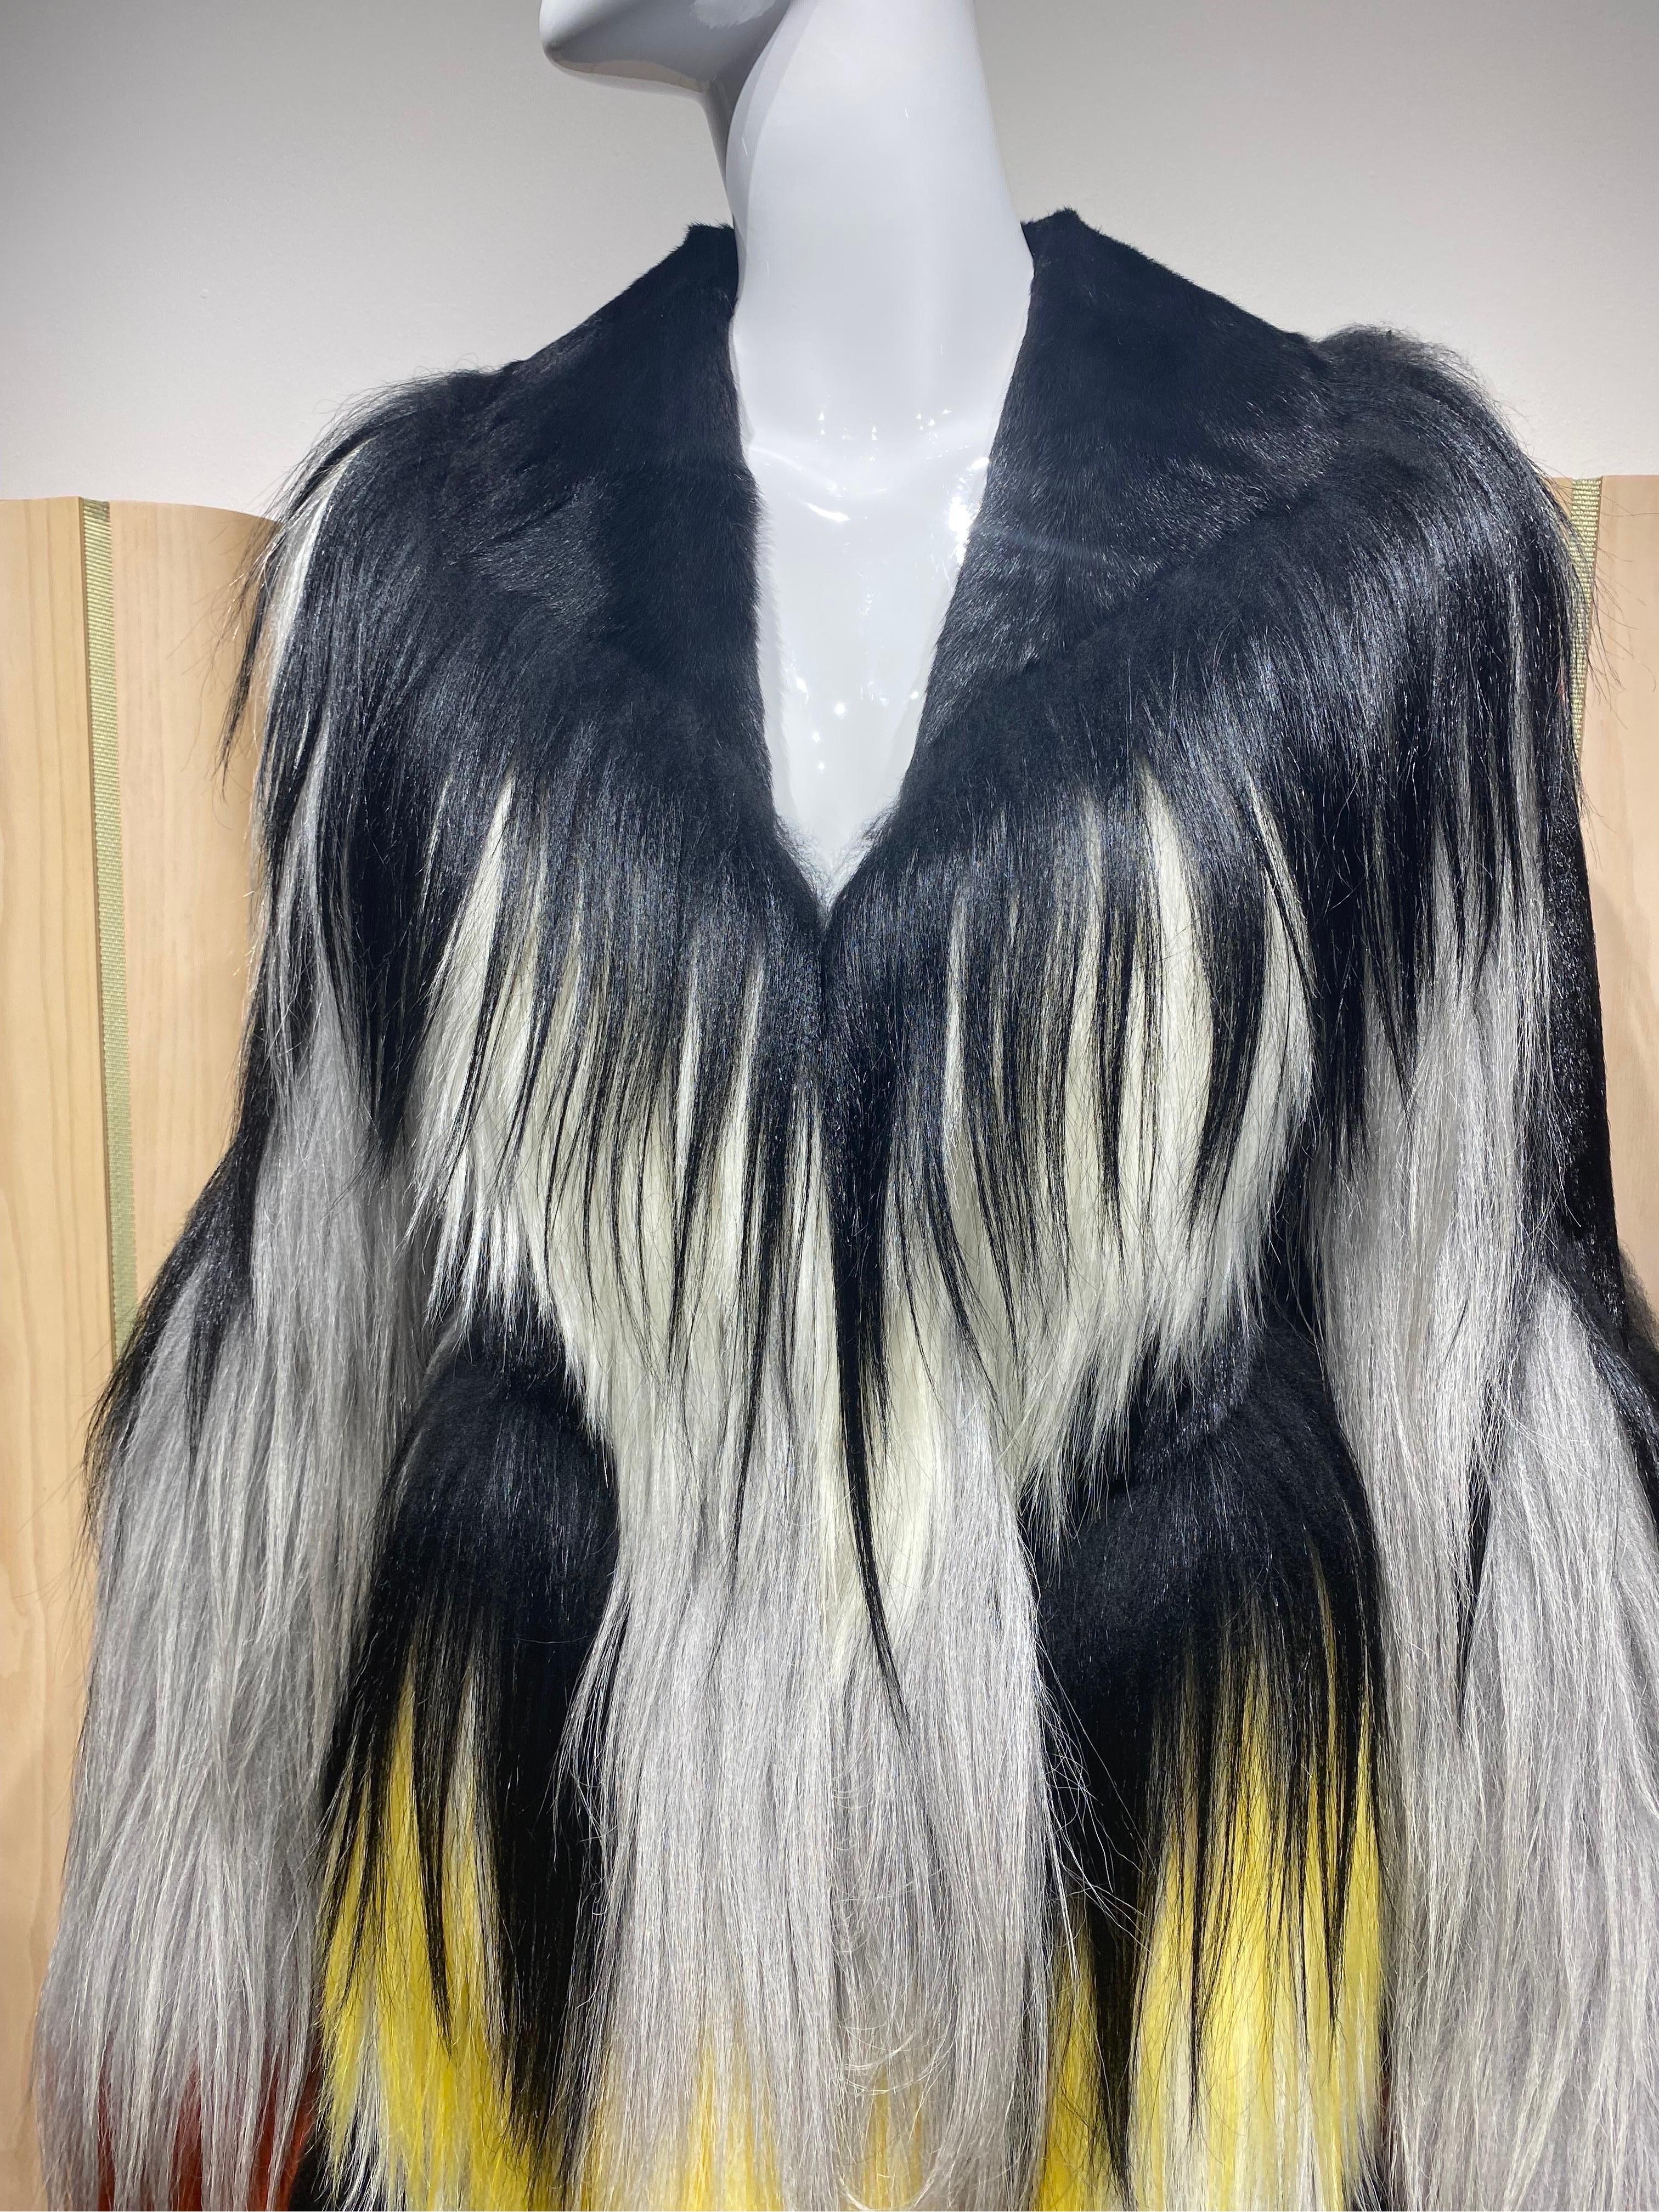 Rodarte 2016 Fur Coat in orange, white, black and yellow. 
Coat is in excellent condition.  Fit size 2/4/6